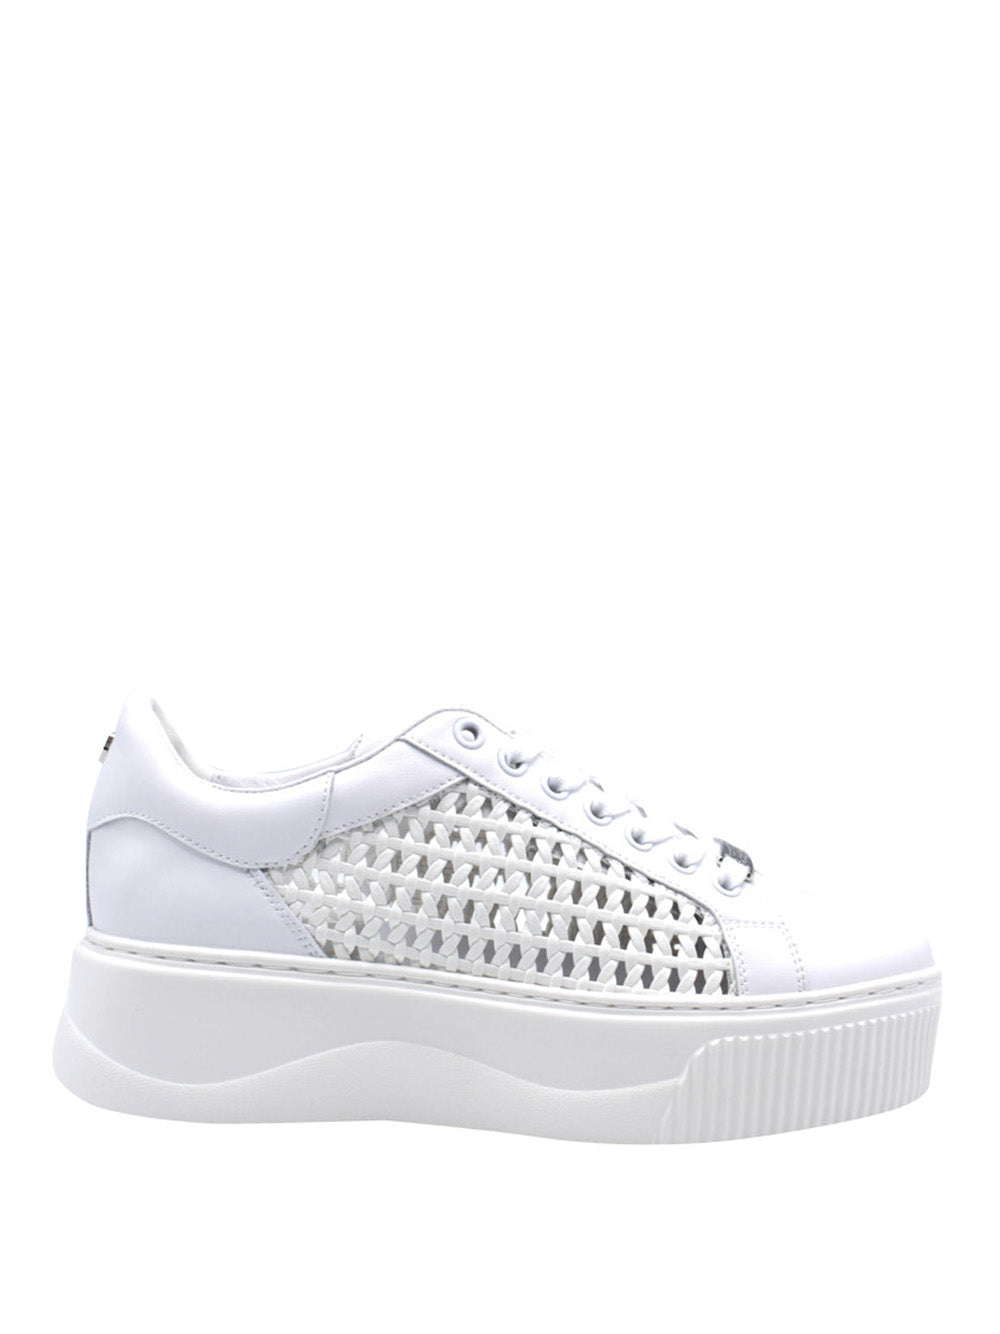 CULT Sneakers platform Donna - Bianco modello CLW423700